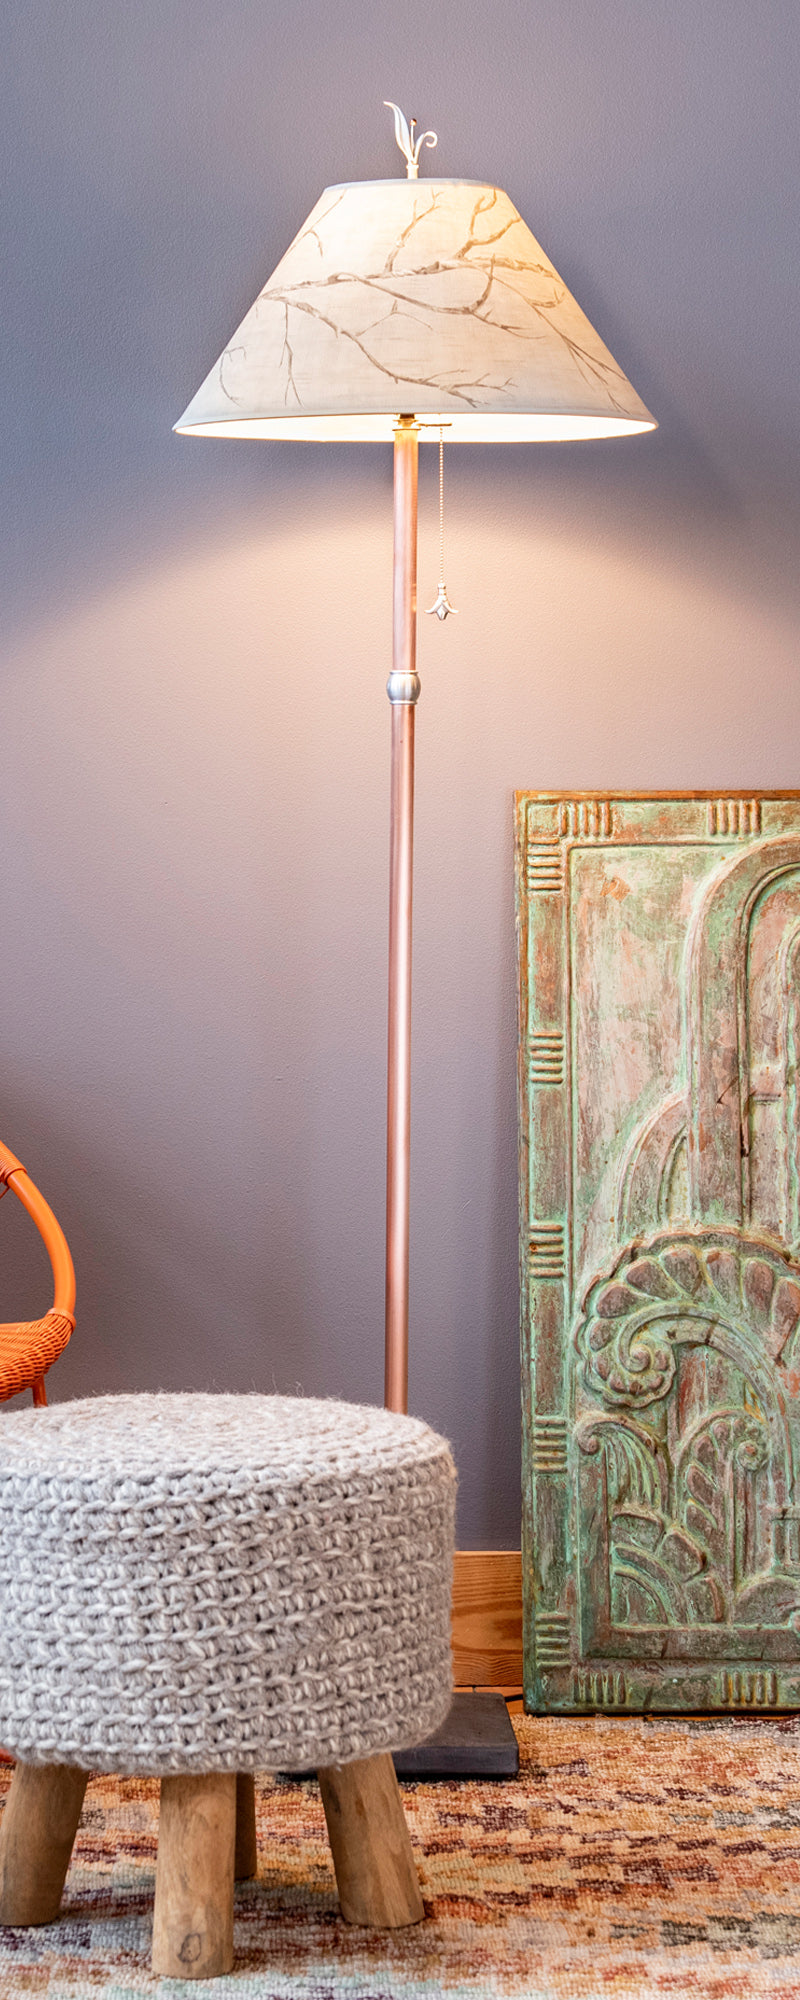 Janna Ugone & Co Floor Lamps Copper Floor Lamp with Large Conical Shade in Sweeping Branch